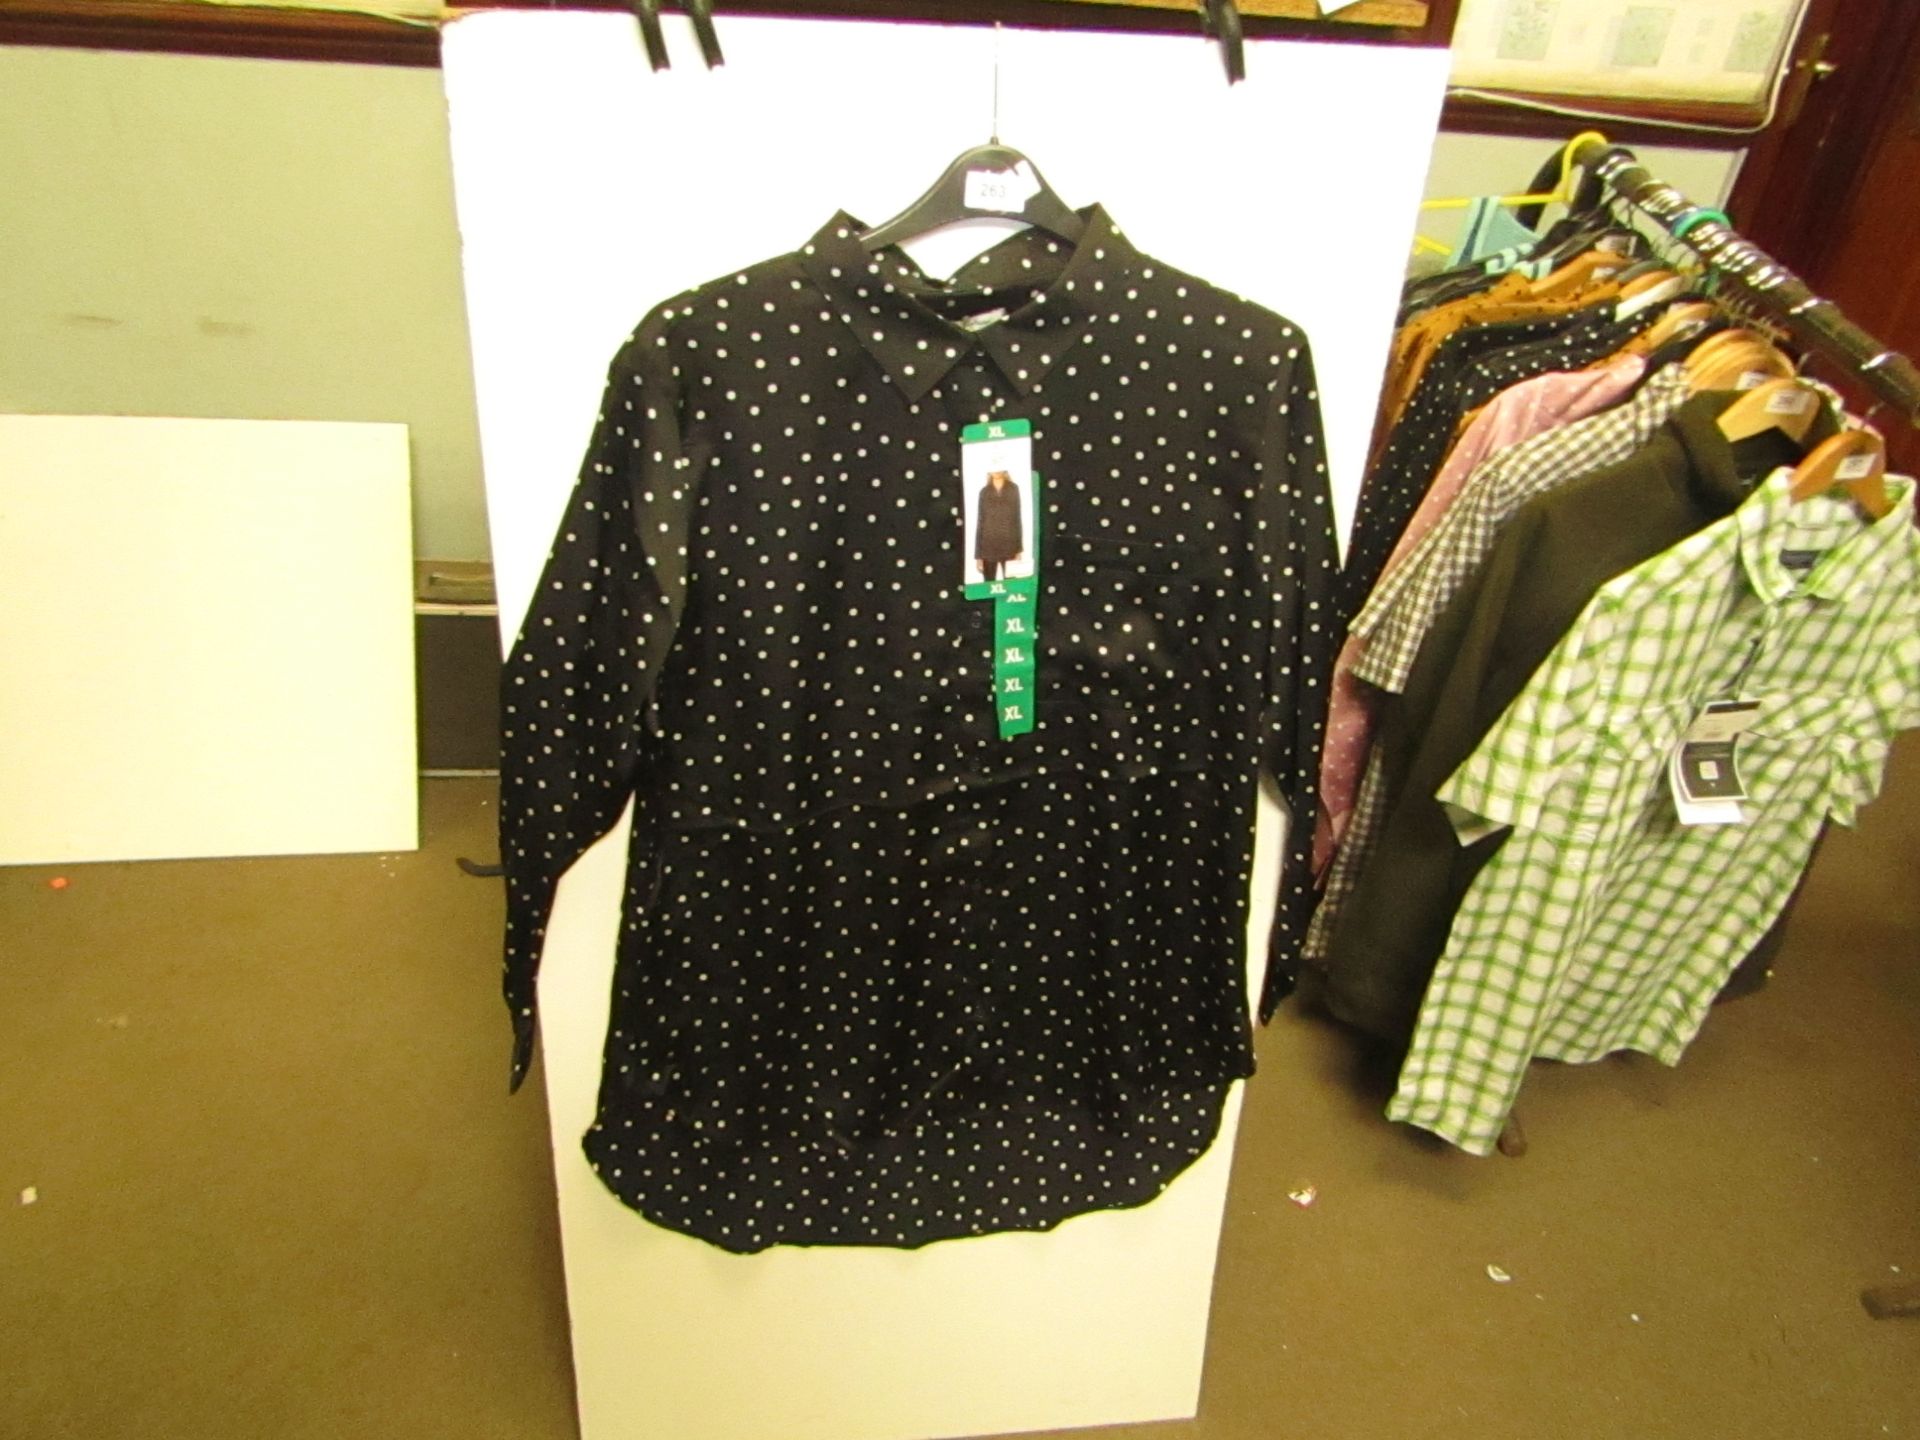 J.A.C.H.S Girlfriend Ladies Blouse Black With White Dots Size M RRP £35 New With Tags